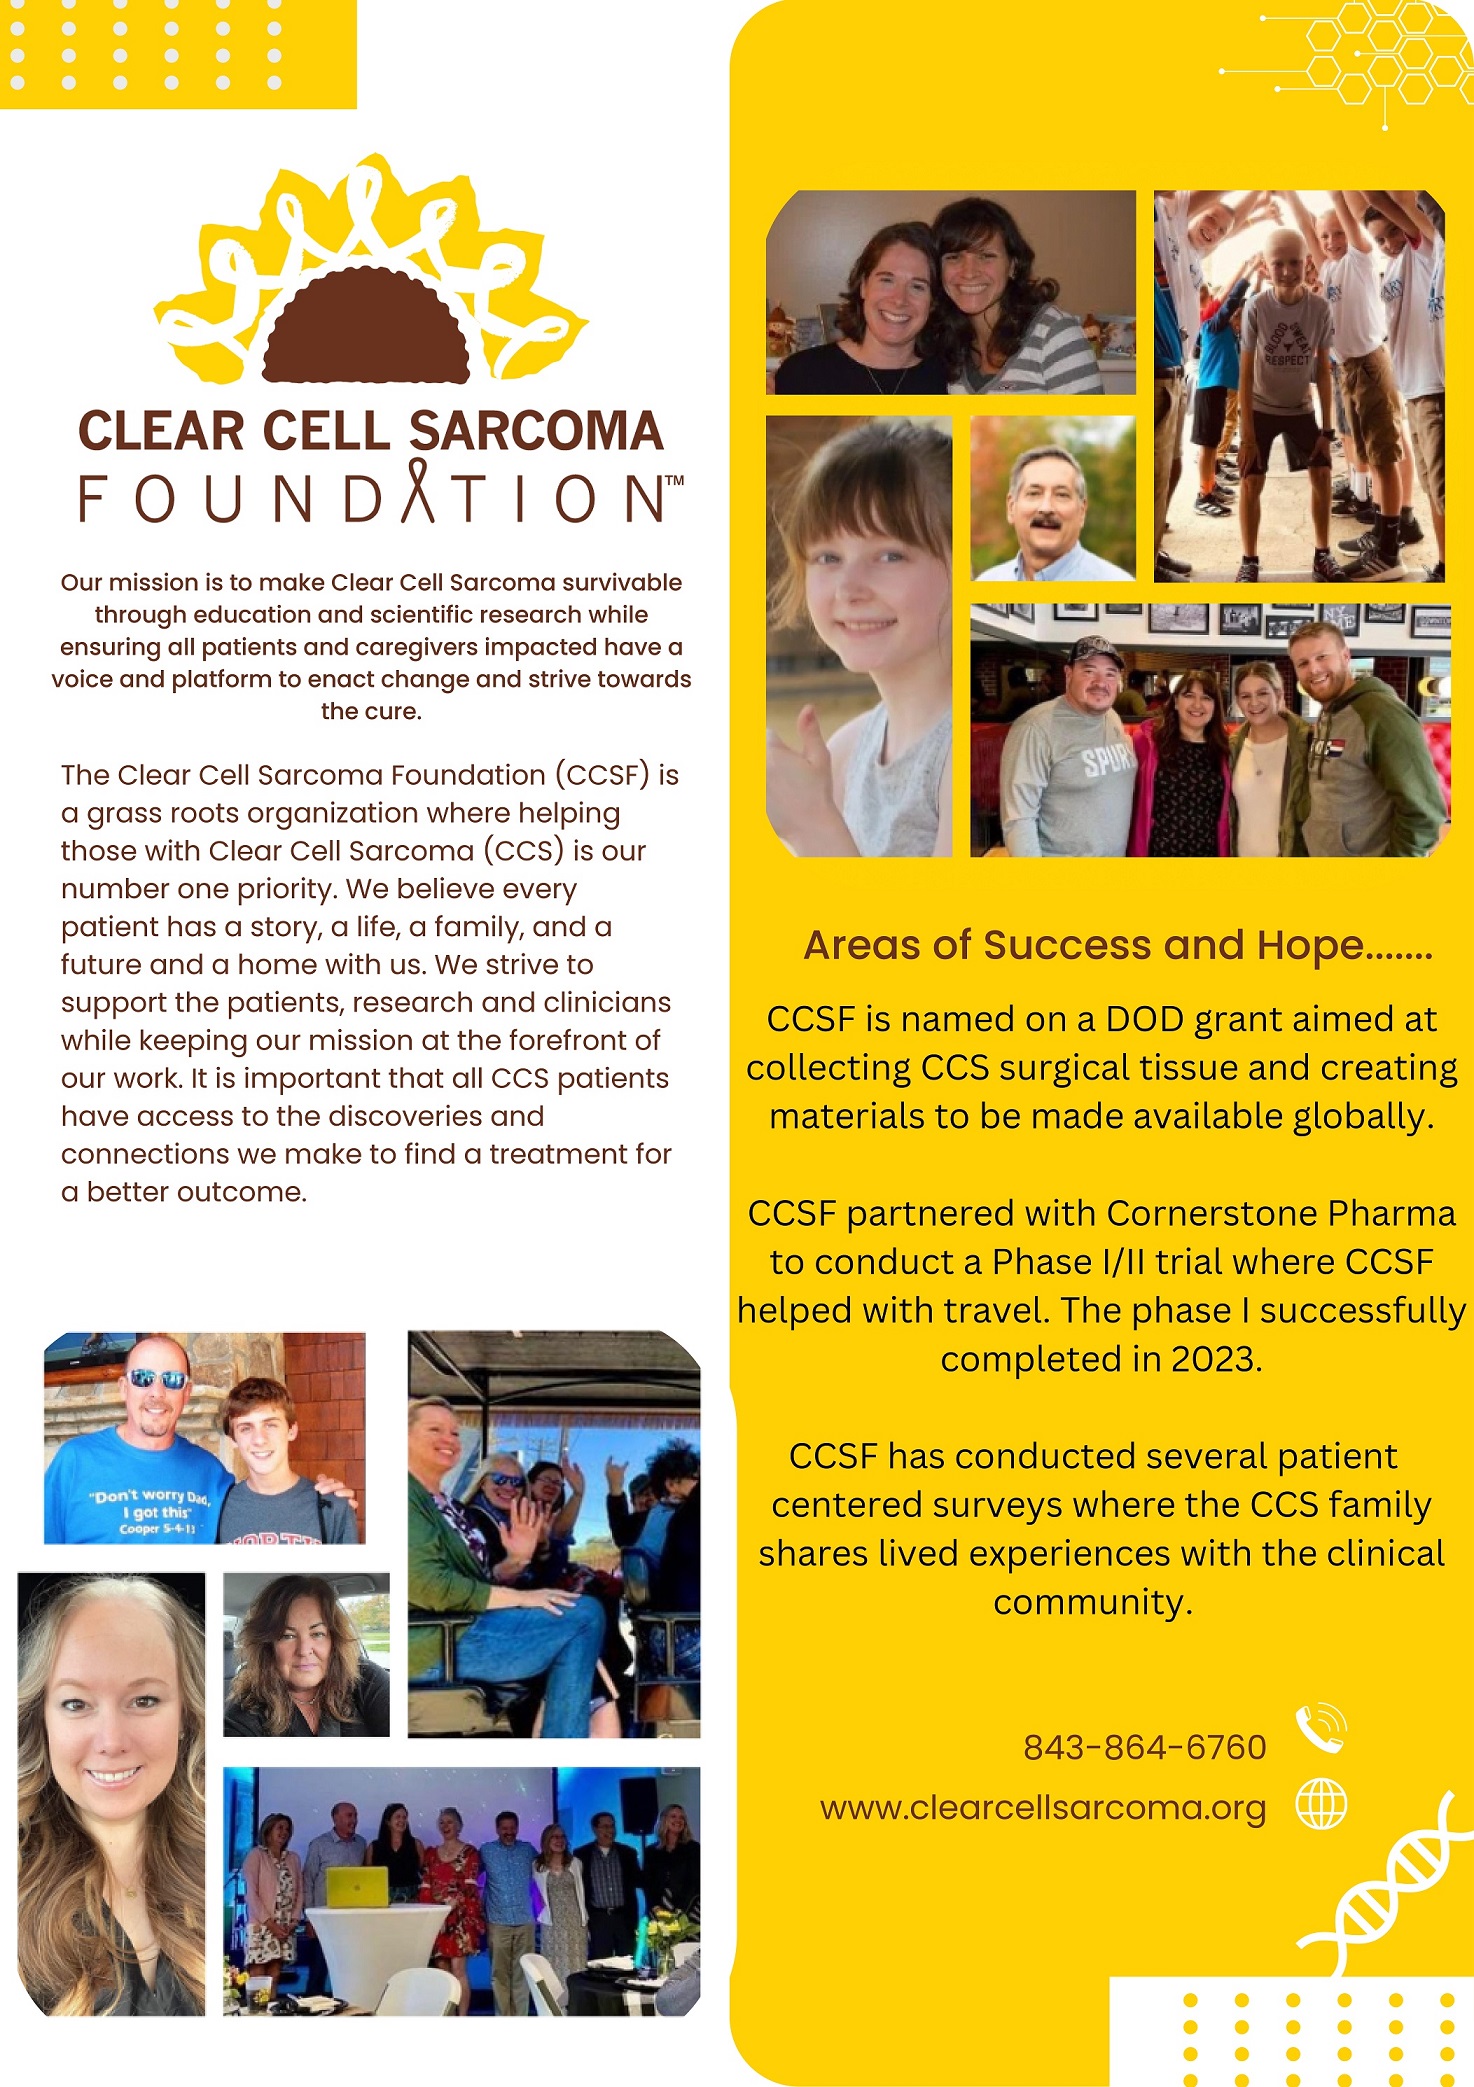 The Clear Cell Sarcoma Foundation, USA